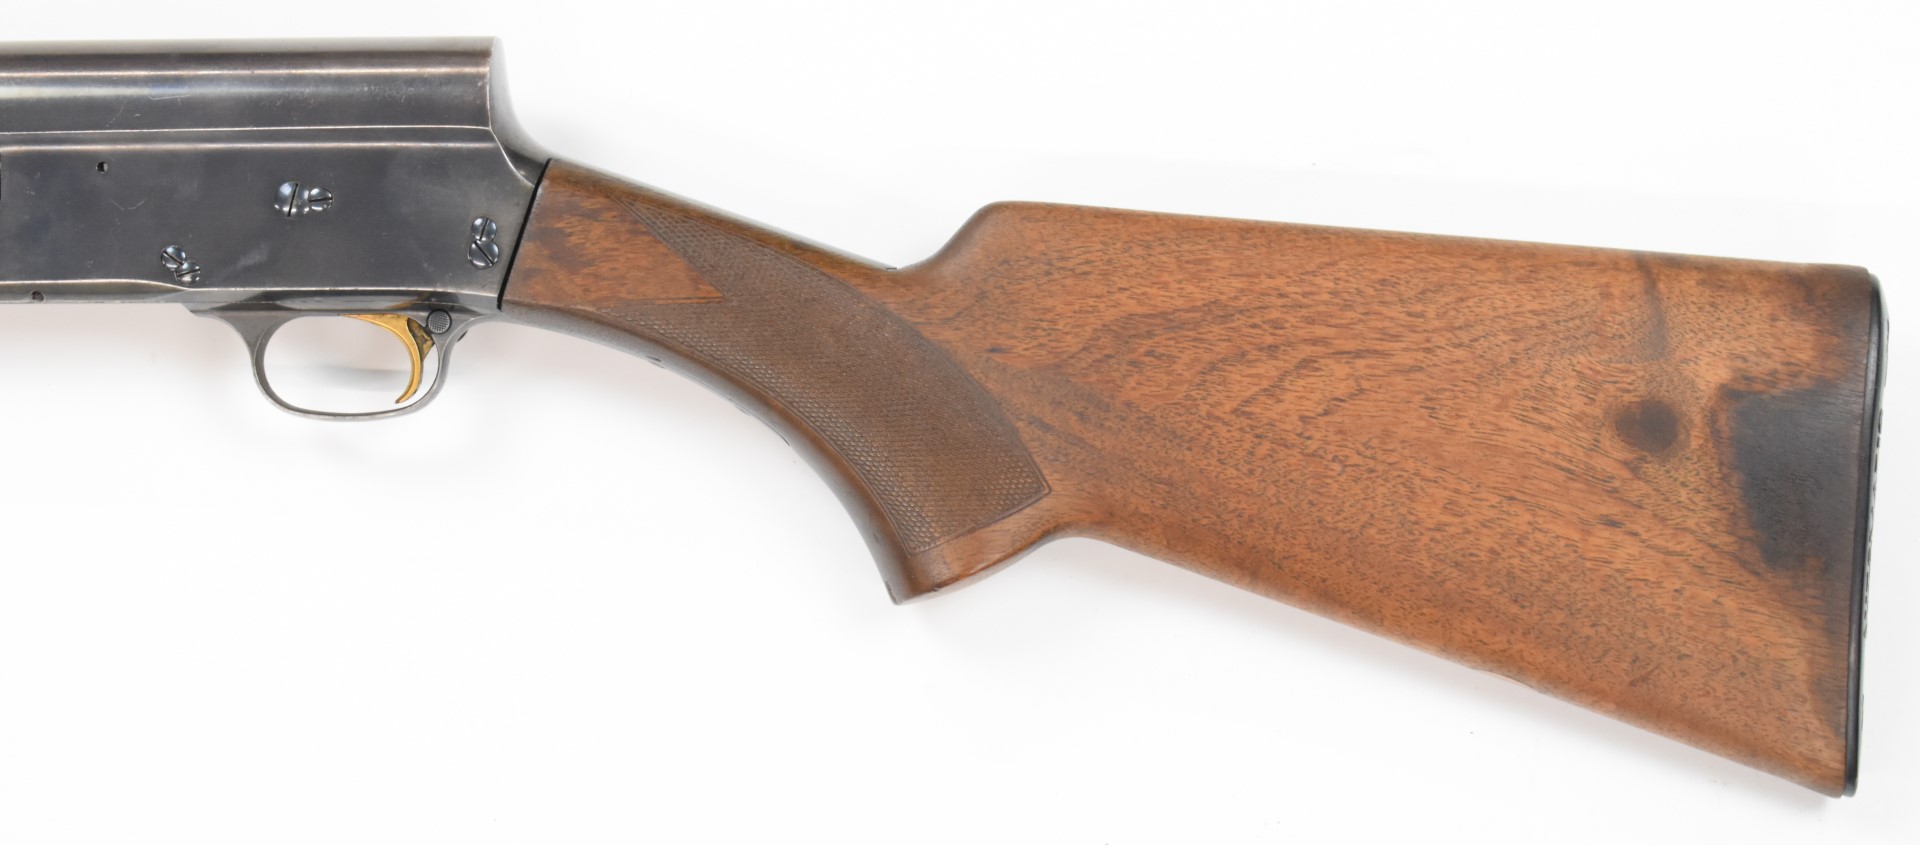 Browning 16 bore 3-shot semi-automatic shotgun with chequered semi-pistol grip and forend and 27 - Image 12 of 18